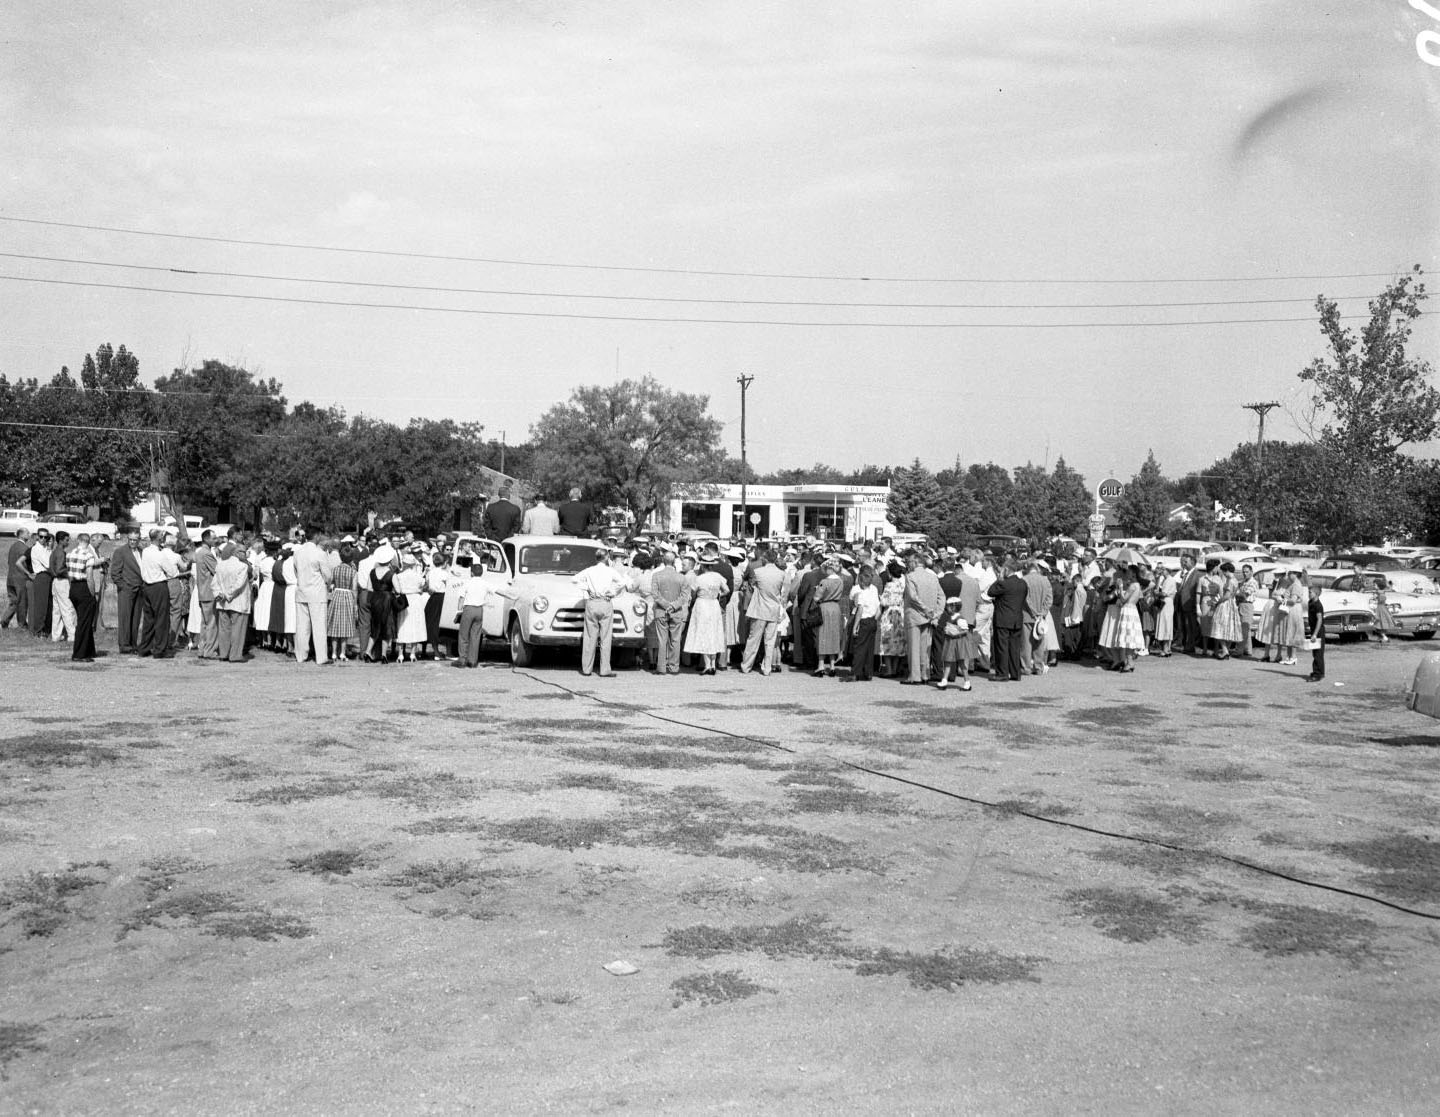 The groundbreaking of University Baptist Church, 1958. There is a crowd of people facing away from the camera. Three people are sitting on top of a truck.